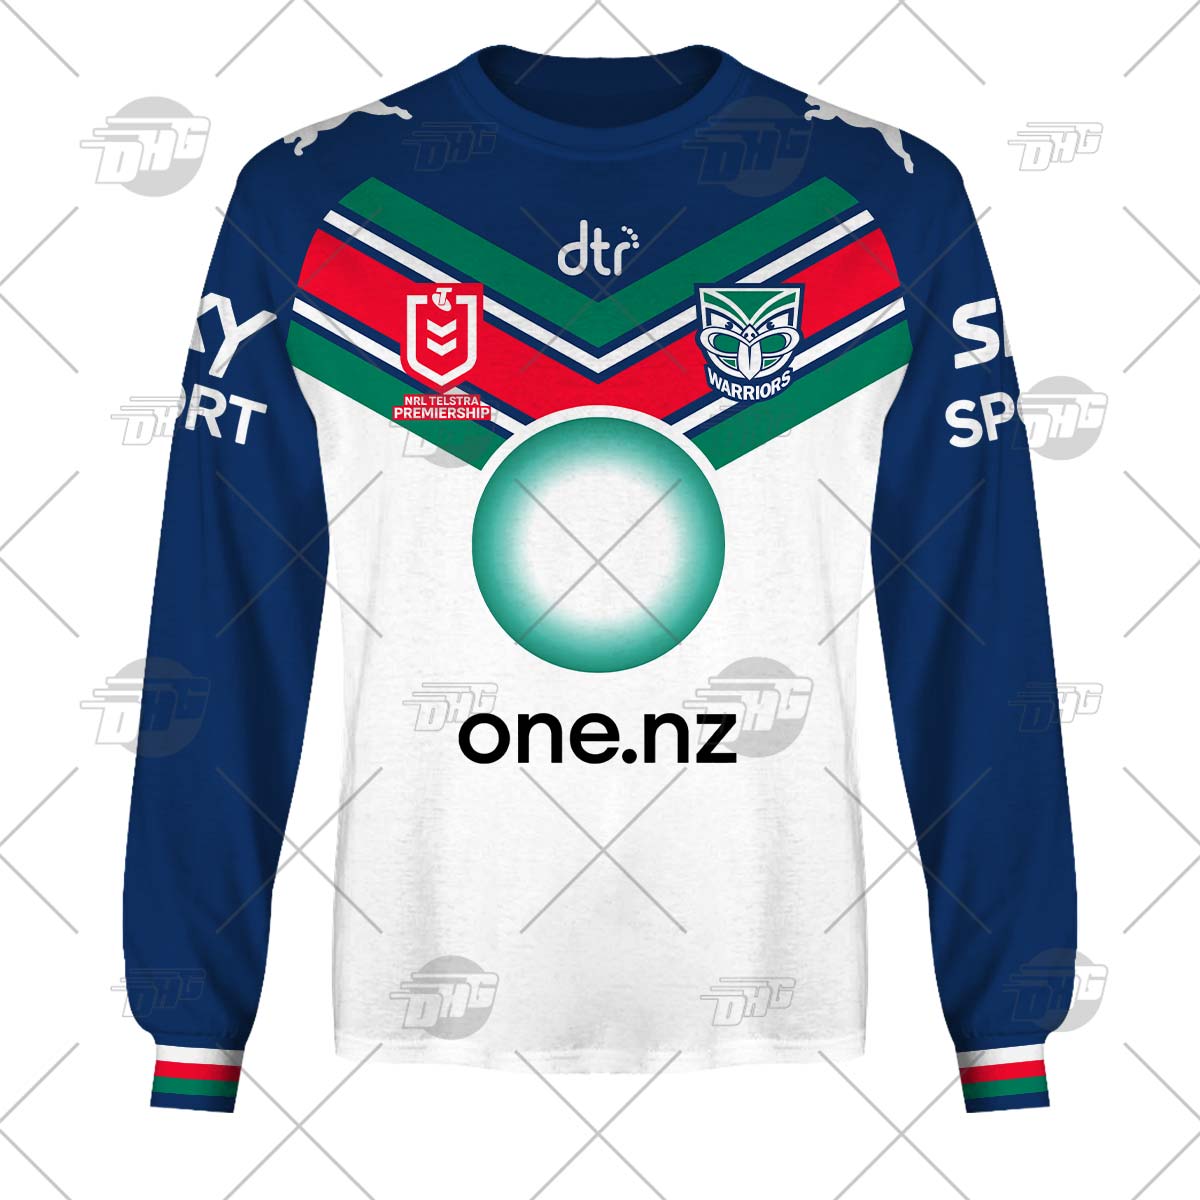 1995 Auckland New Zealand Warriors Rugby League Away Jersey -  OldSchoolThings - Personalize Your Own New & Retro Sports Jerseys, Hoodies,  T Shirts